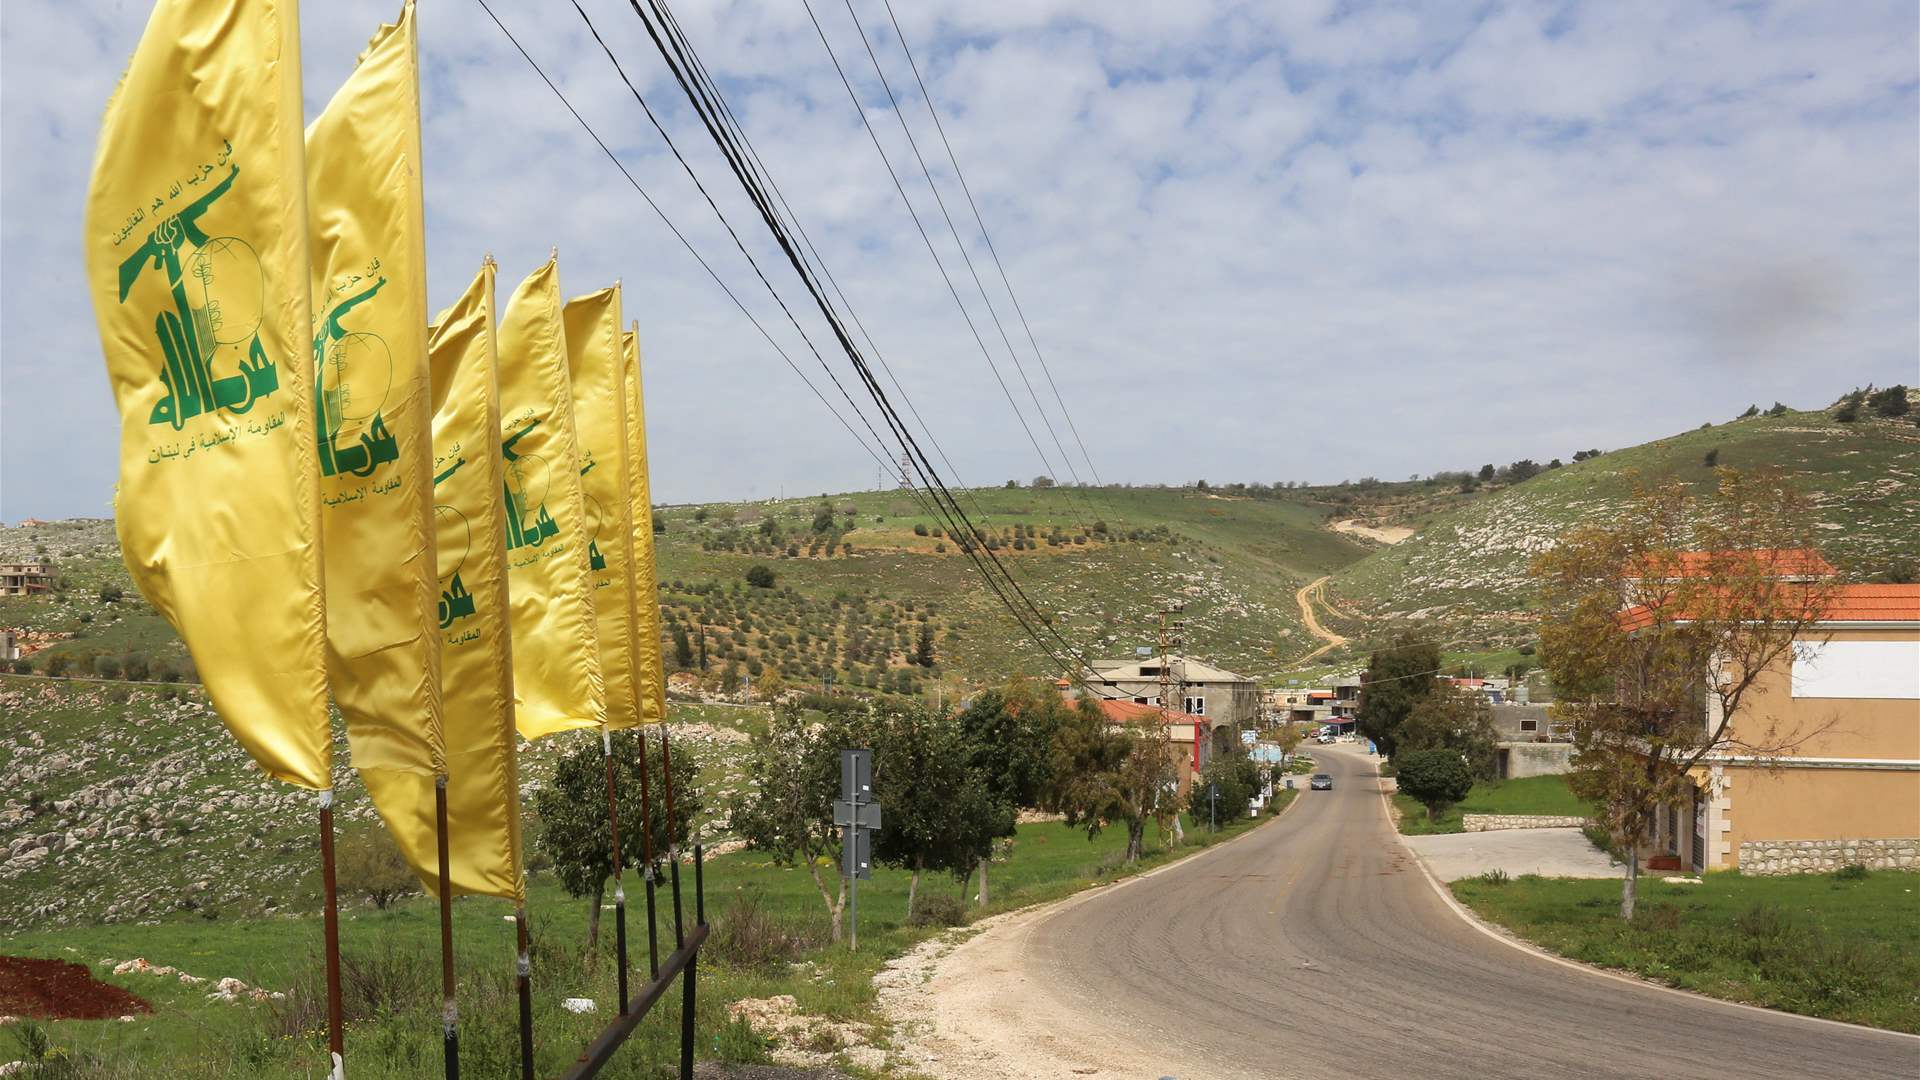 Hezbollah&#39;s Sunday morning strike: Israeli &#39;occupation&#39; forces suffer injuries